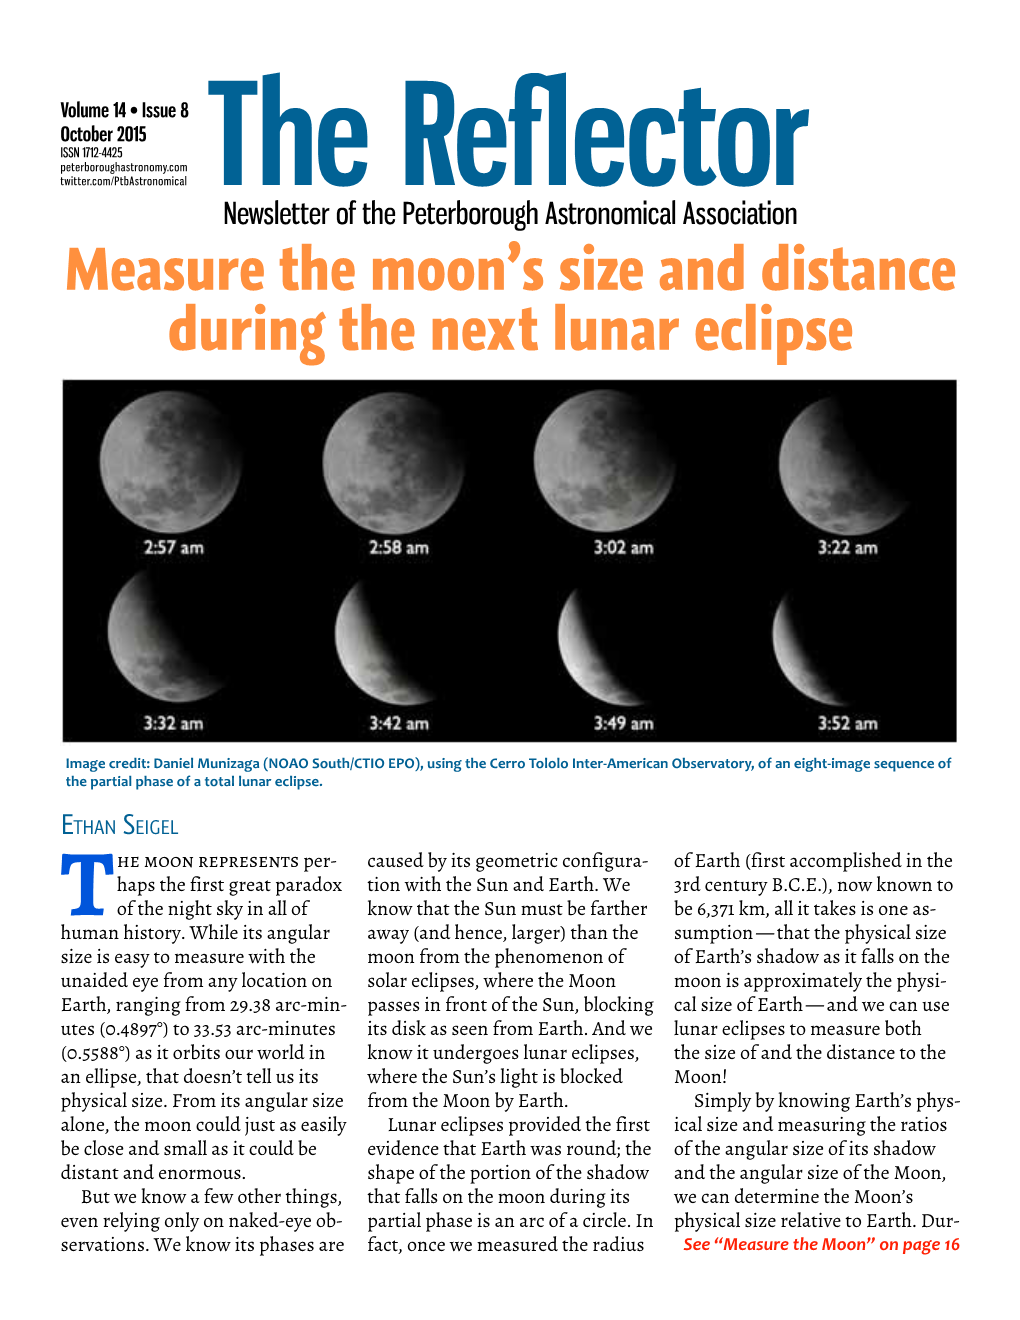 The Reflector Newsletter of the Peterborough Astronomical Association Measure the Moon’S Size and Distance During the Next Lunar Eclipse